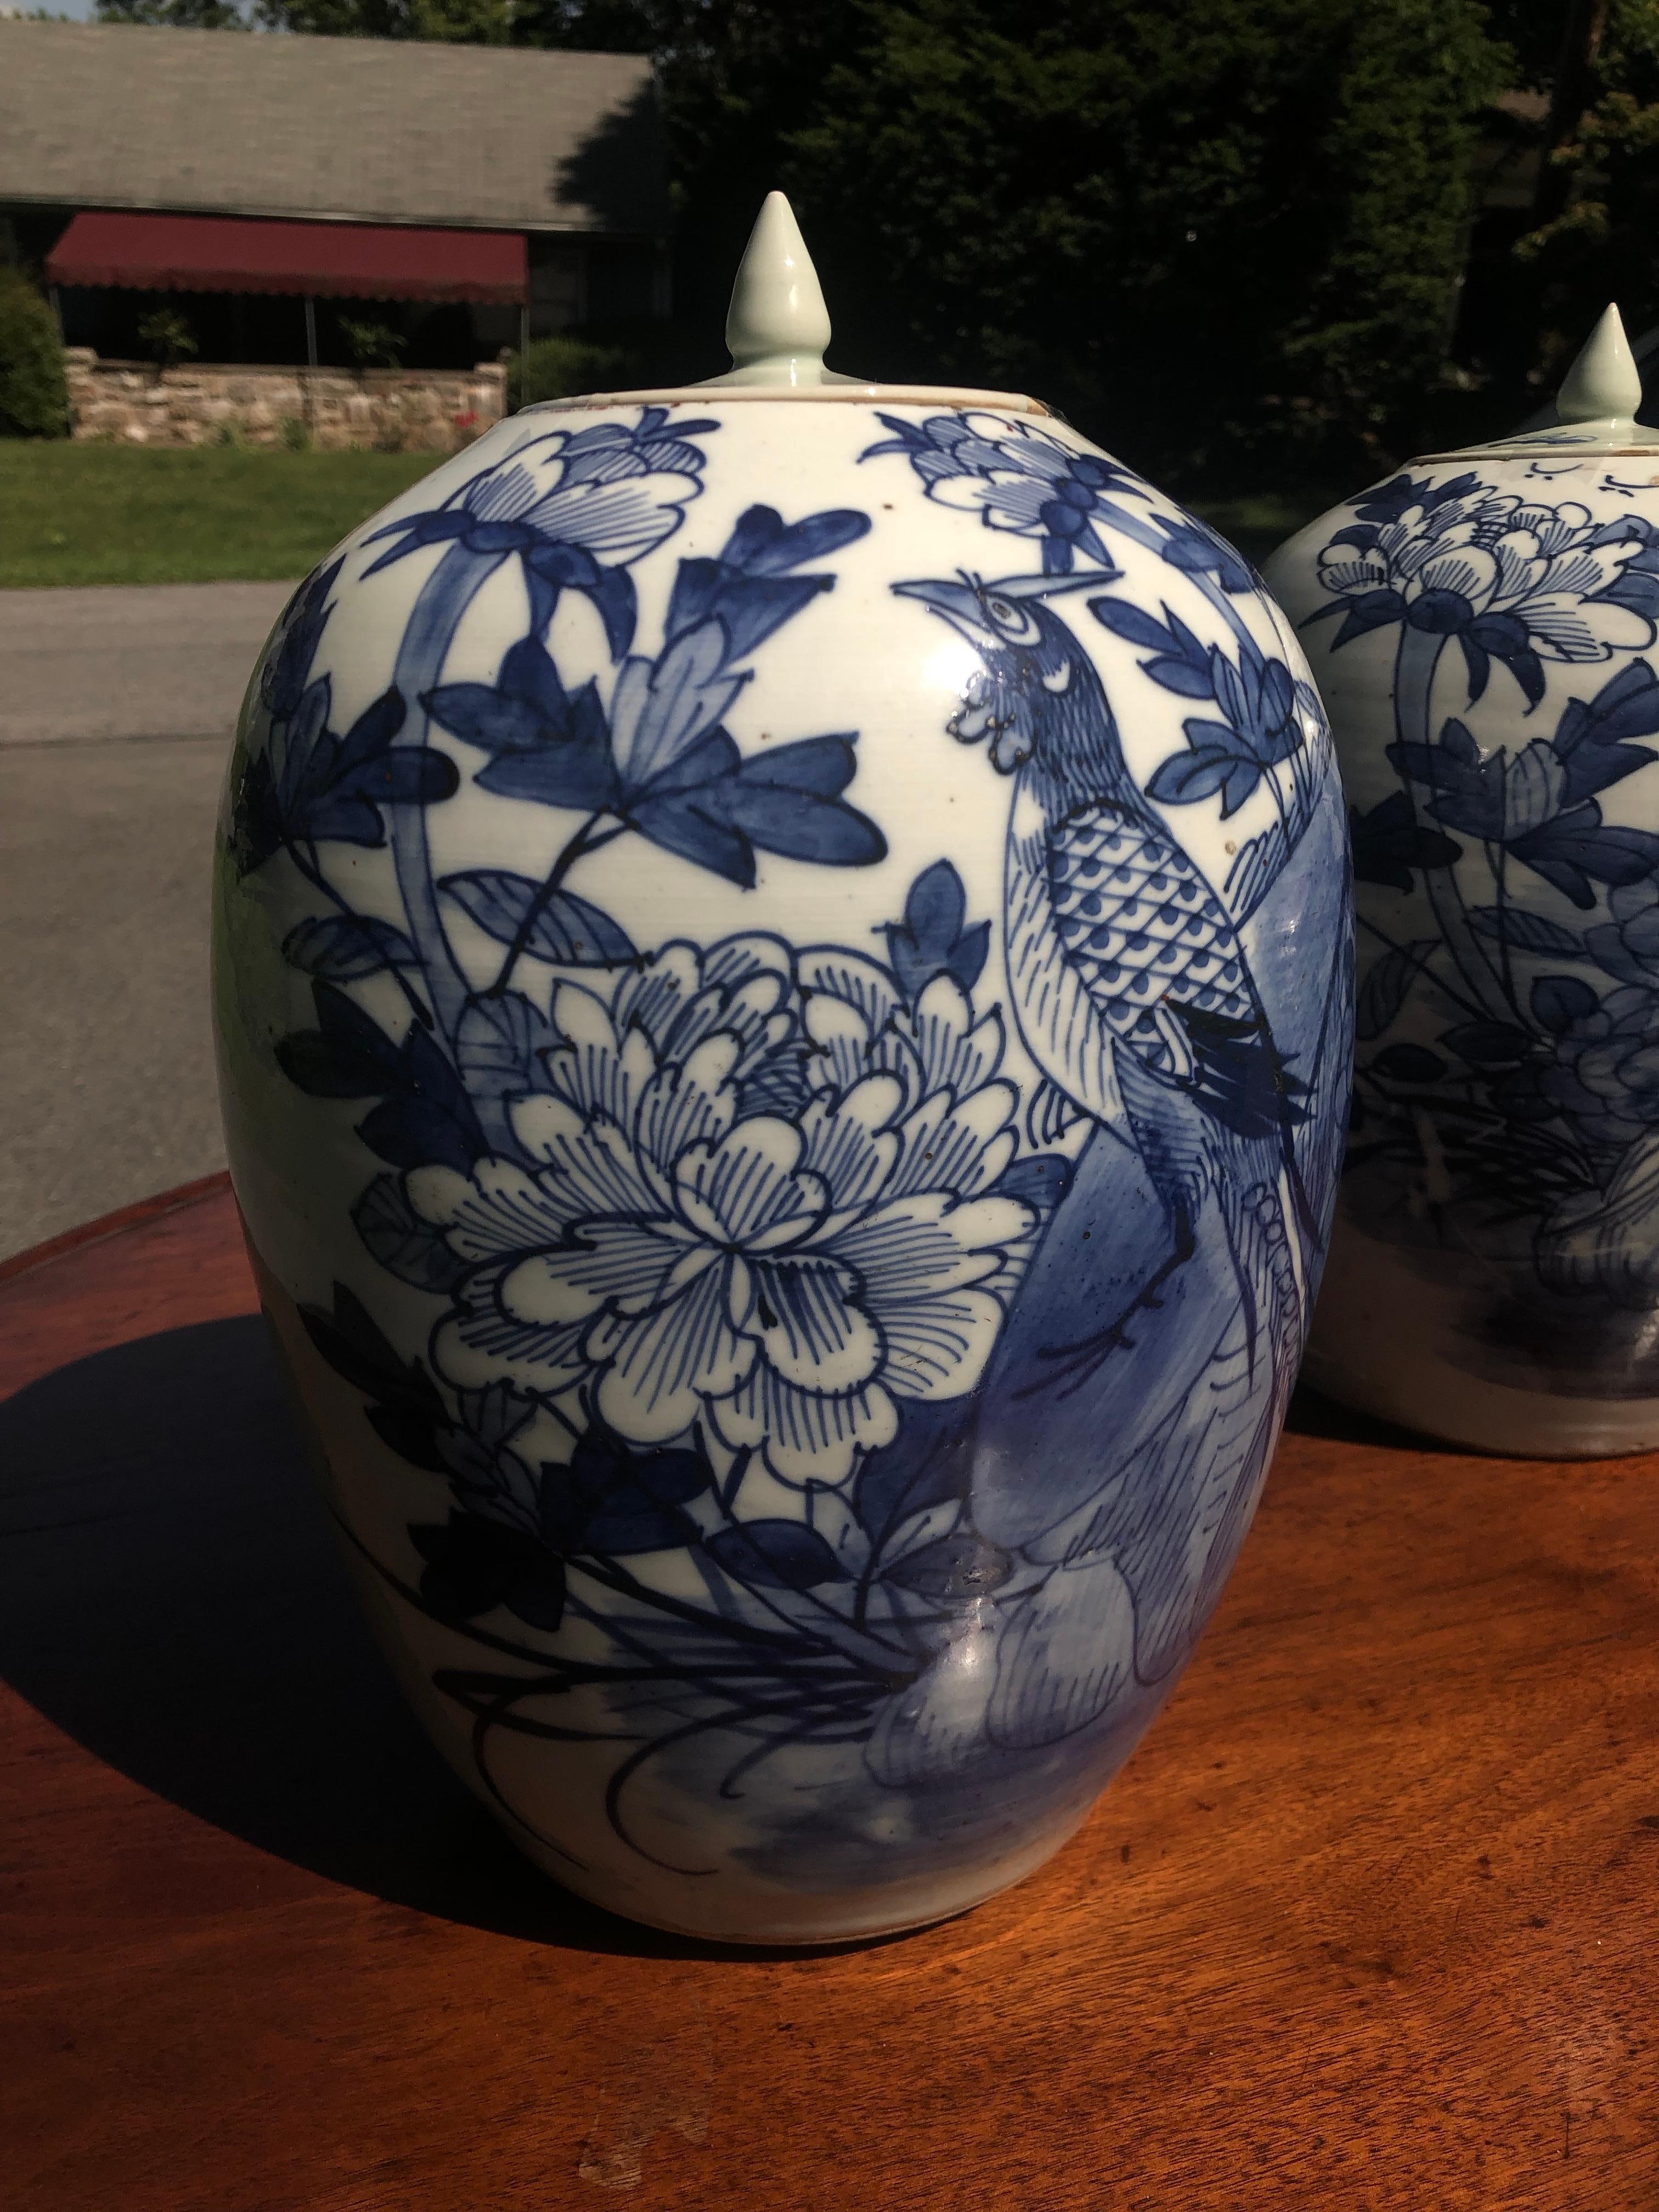 Chinese blue and white porcelain ginger jar 12 inches high with lid, late 19th century
Peafowl design great
No chips or cracks.